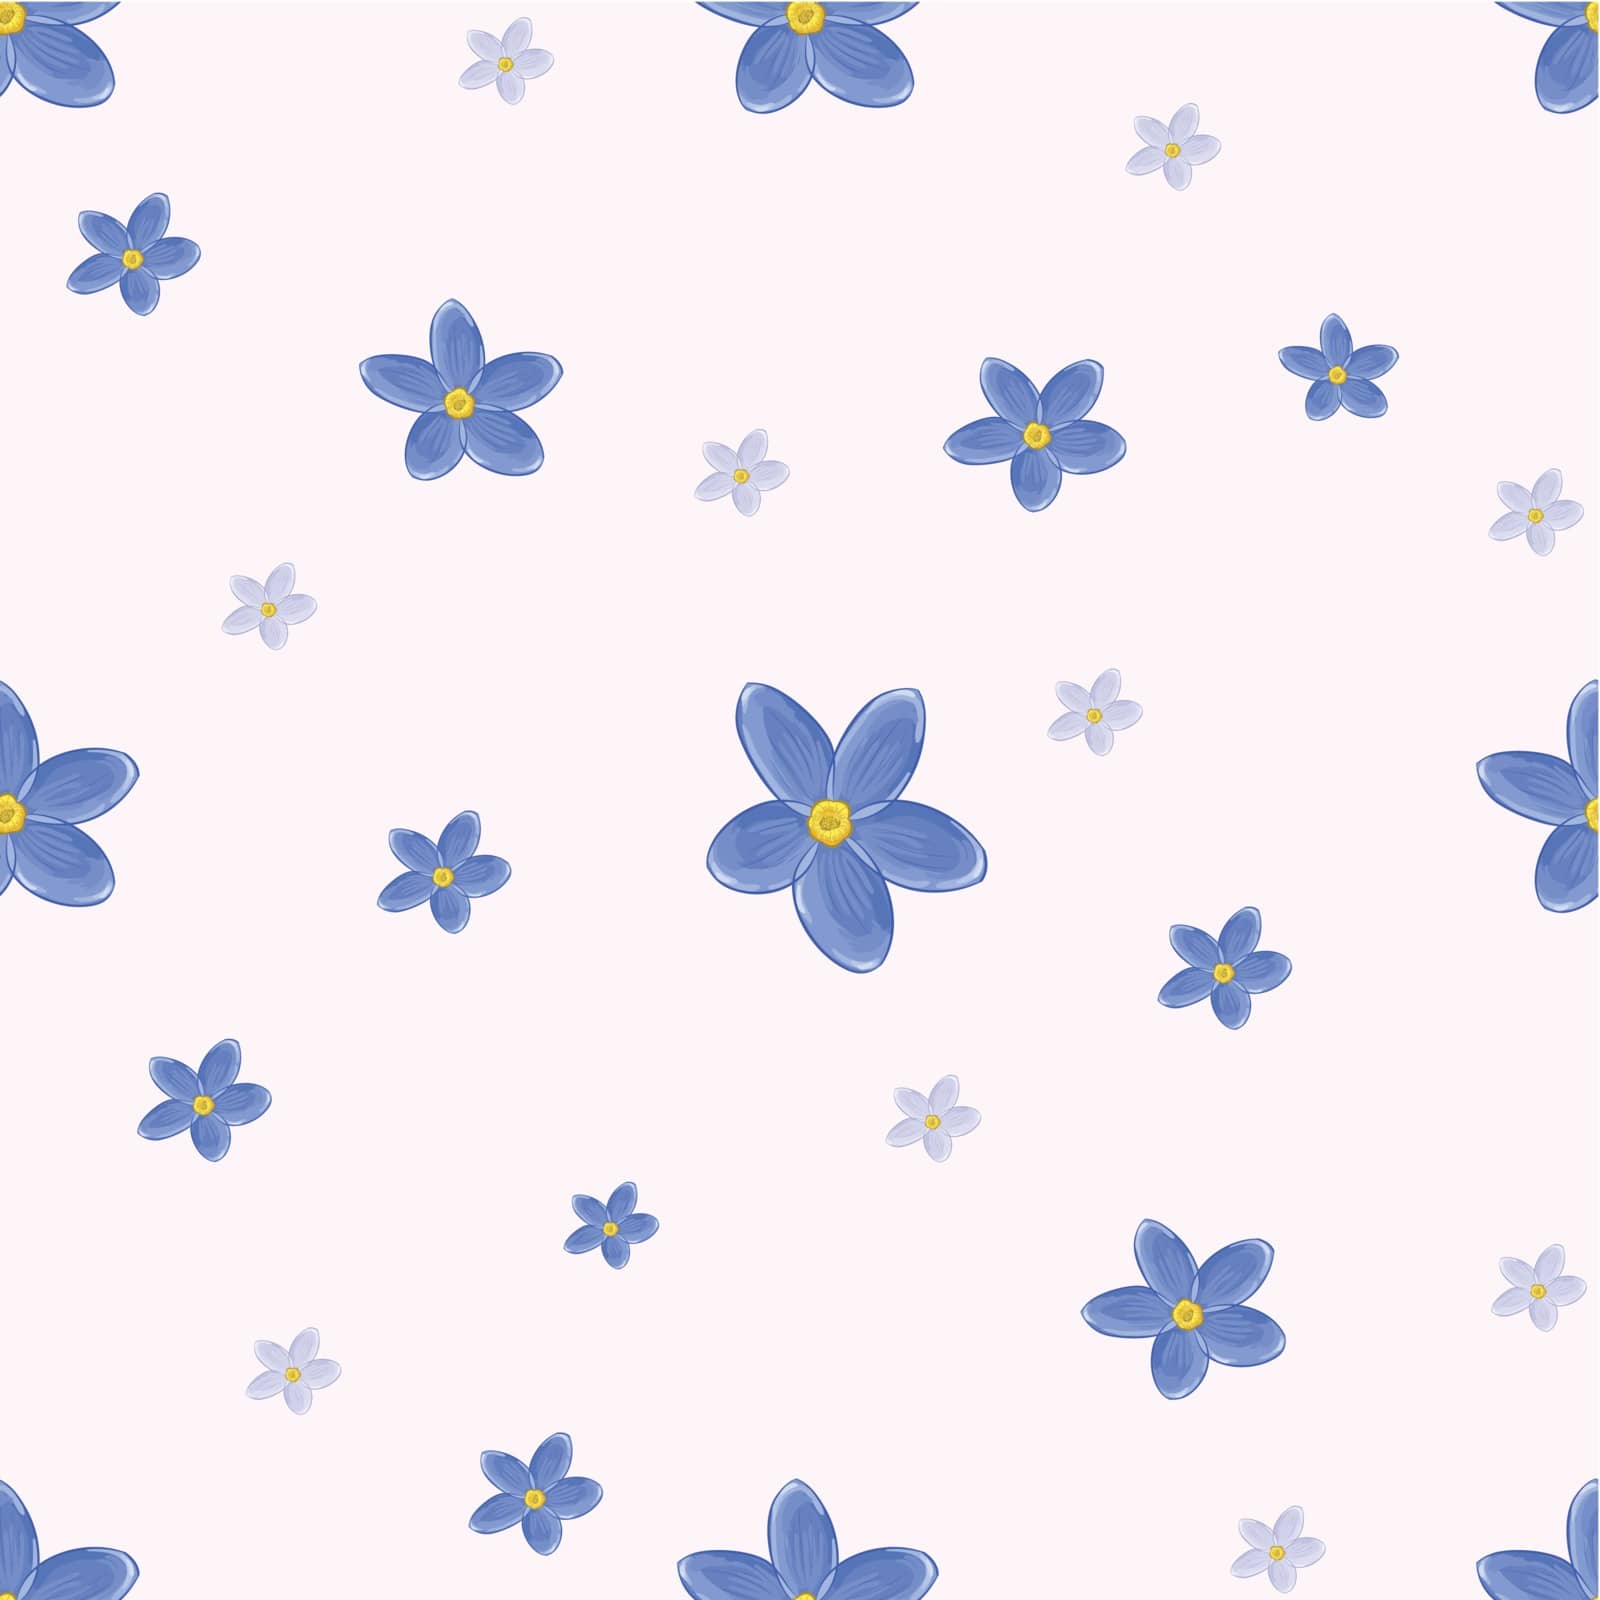 Stylish beautiful floral seamless pattern. Abstract Elegance vector illustration texture with forget-me-not.